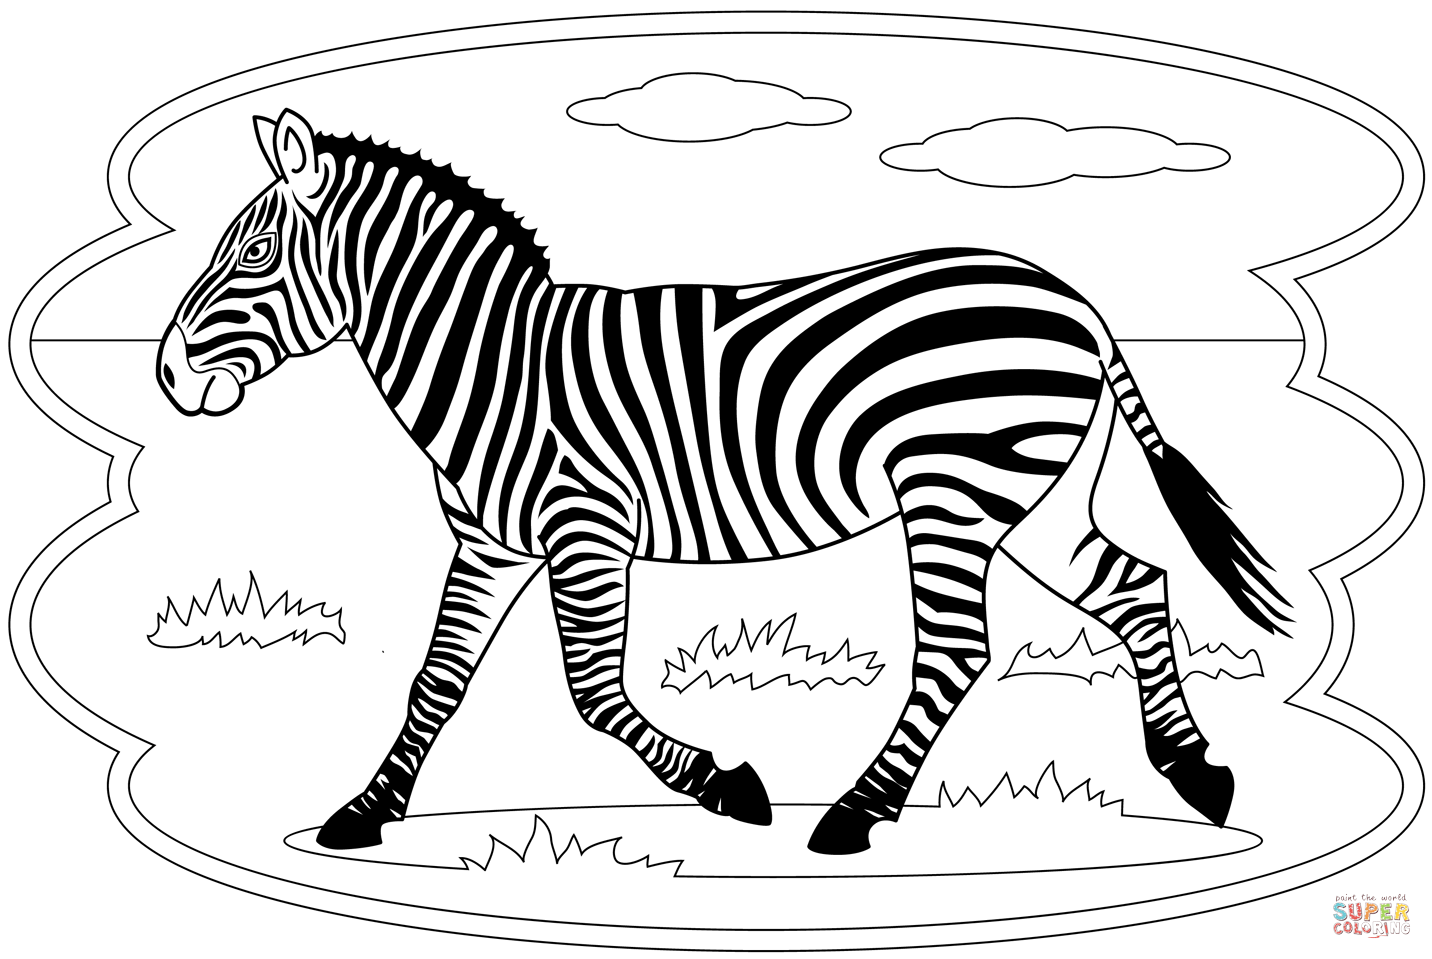 Zebra coloring page free printable coloring pages zebra coloring pages zebra coloring pages